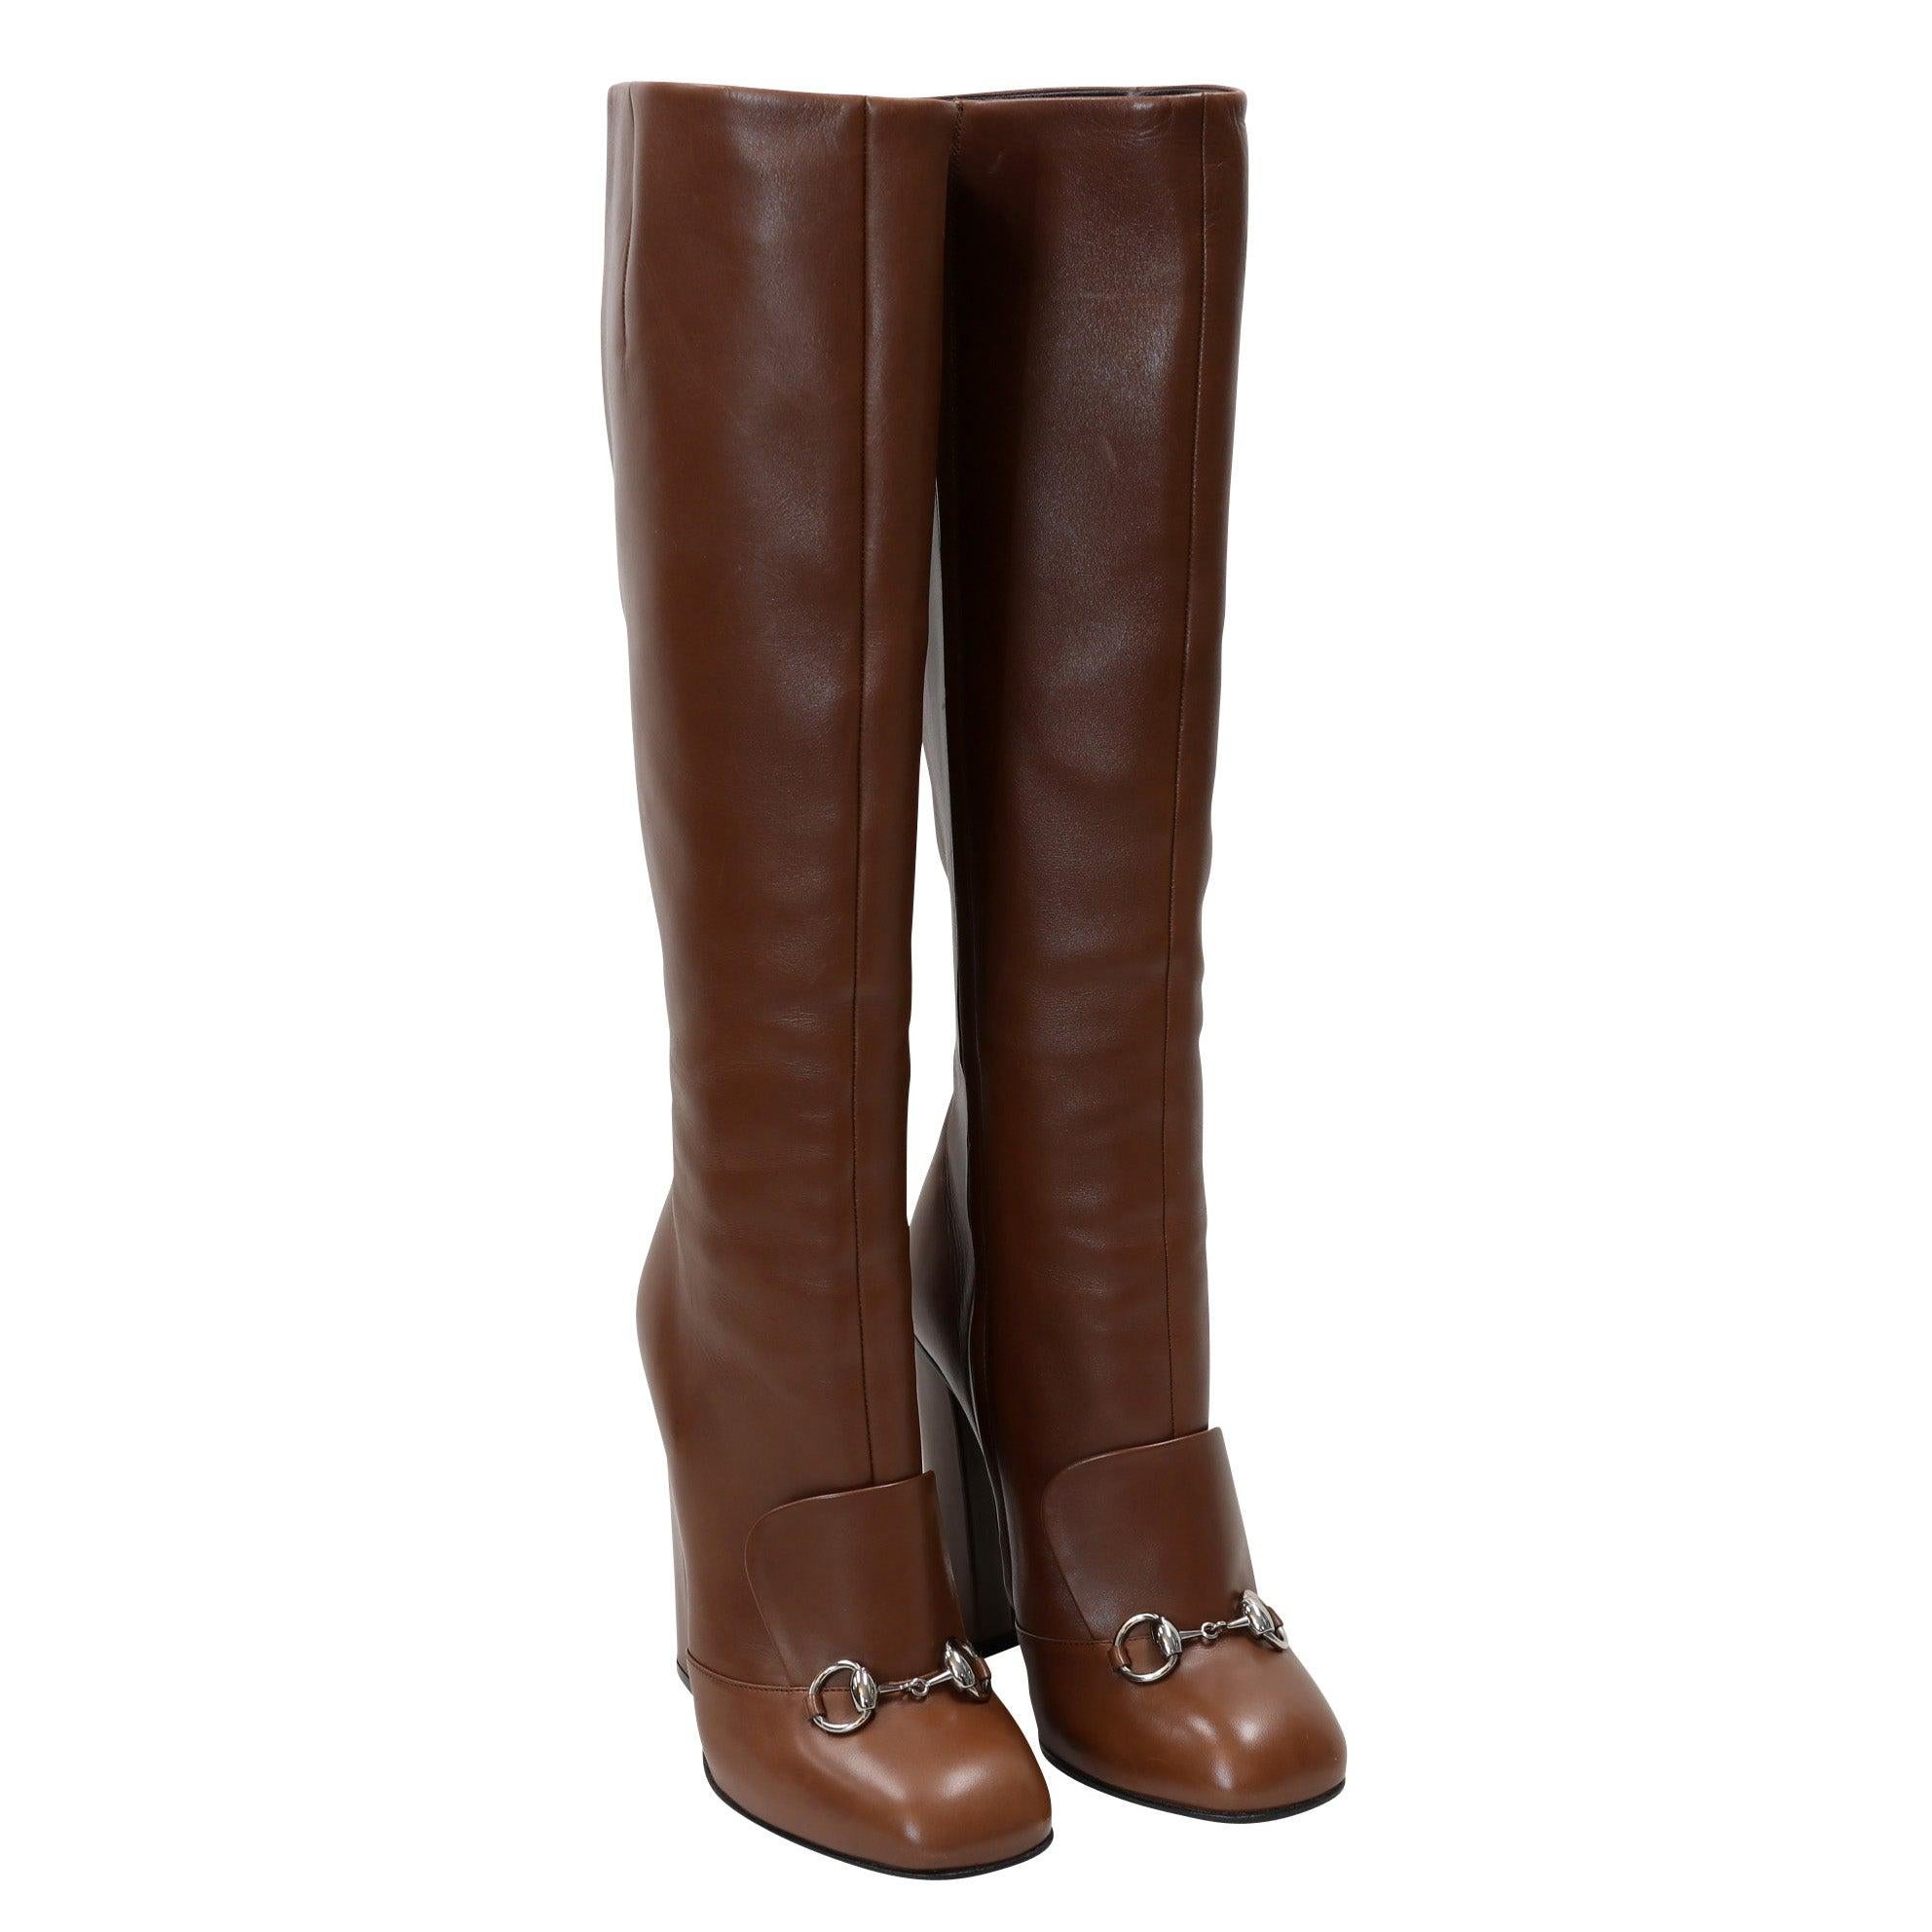 Gucci Brown Leather Horsebit Knee High Riding Boots 39.5 GG-S1111P-0001 In Good Condition For Sale In Downey, CA